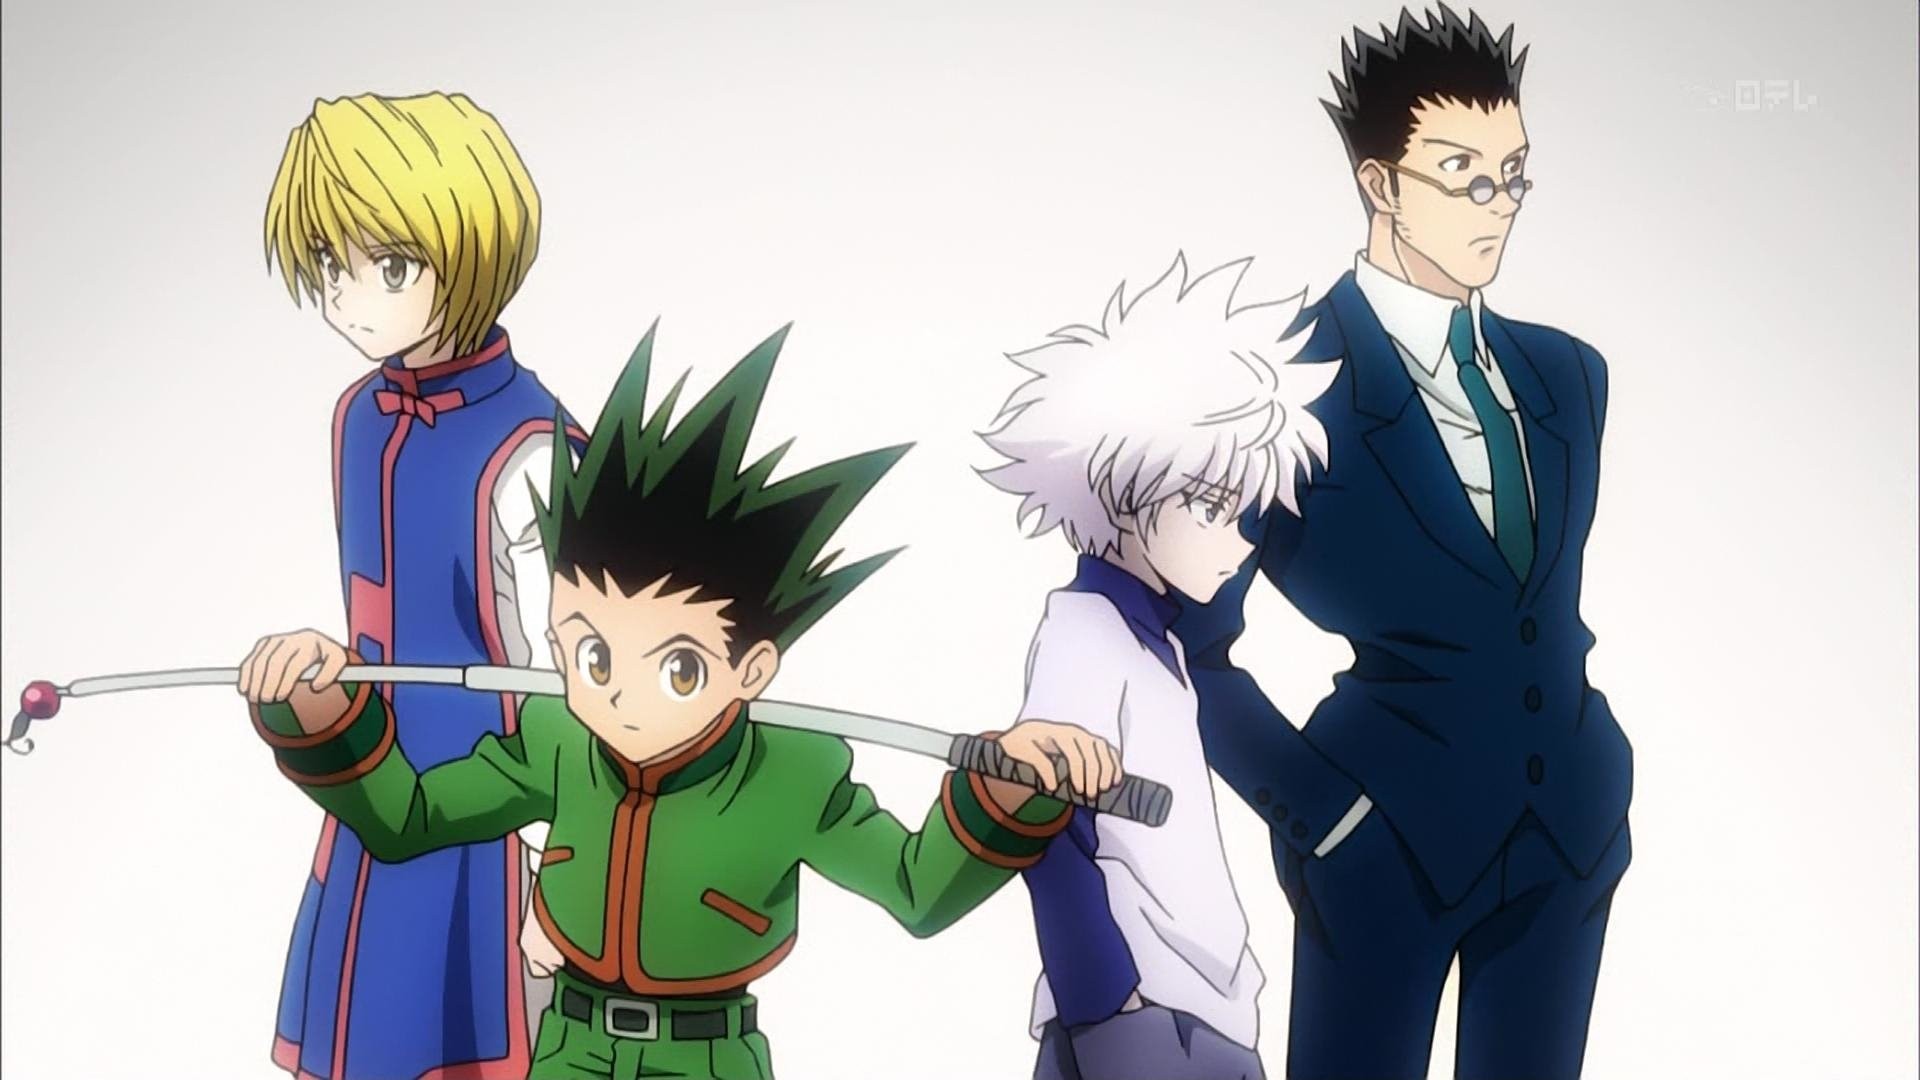 Gon And Killua Movie Wallpaper with high-resolution 1920x1080 pixel. You can use this poster wallpaper for your Desktop Computers, Mac Screensavers, Windows Backgrounds, iPhone Wallpapers, Tablet or Android Lock screen and another Mobile device